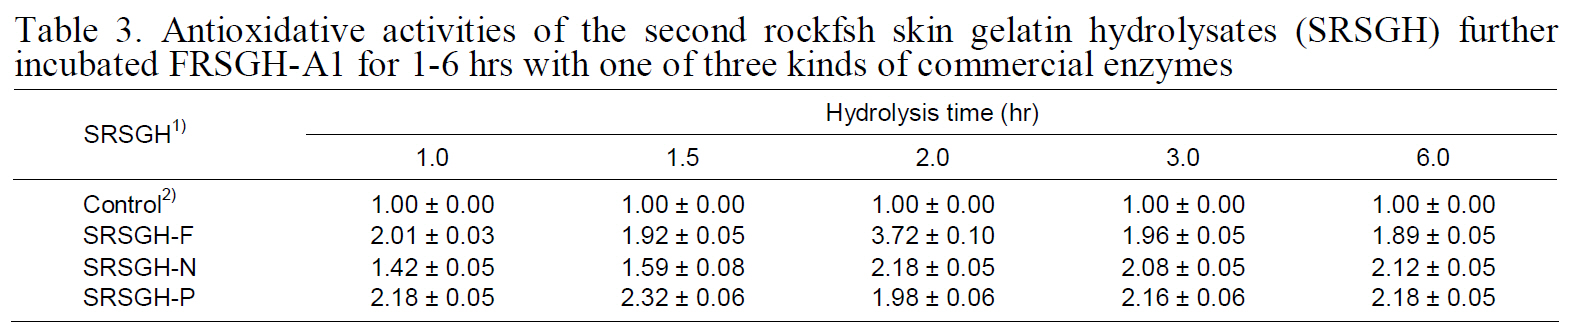 Antioxidative activities of the second rockfsh skin gelatin hydrolysates (SRSGH) furtherincubated FRSGH-A1 for 1-6 hrs with one of three kinds of commercial enzymes